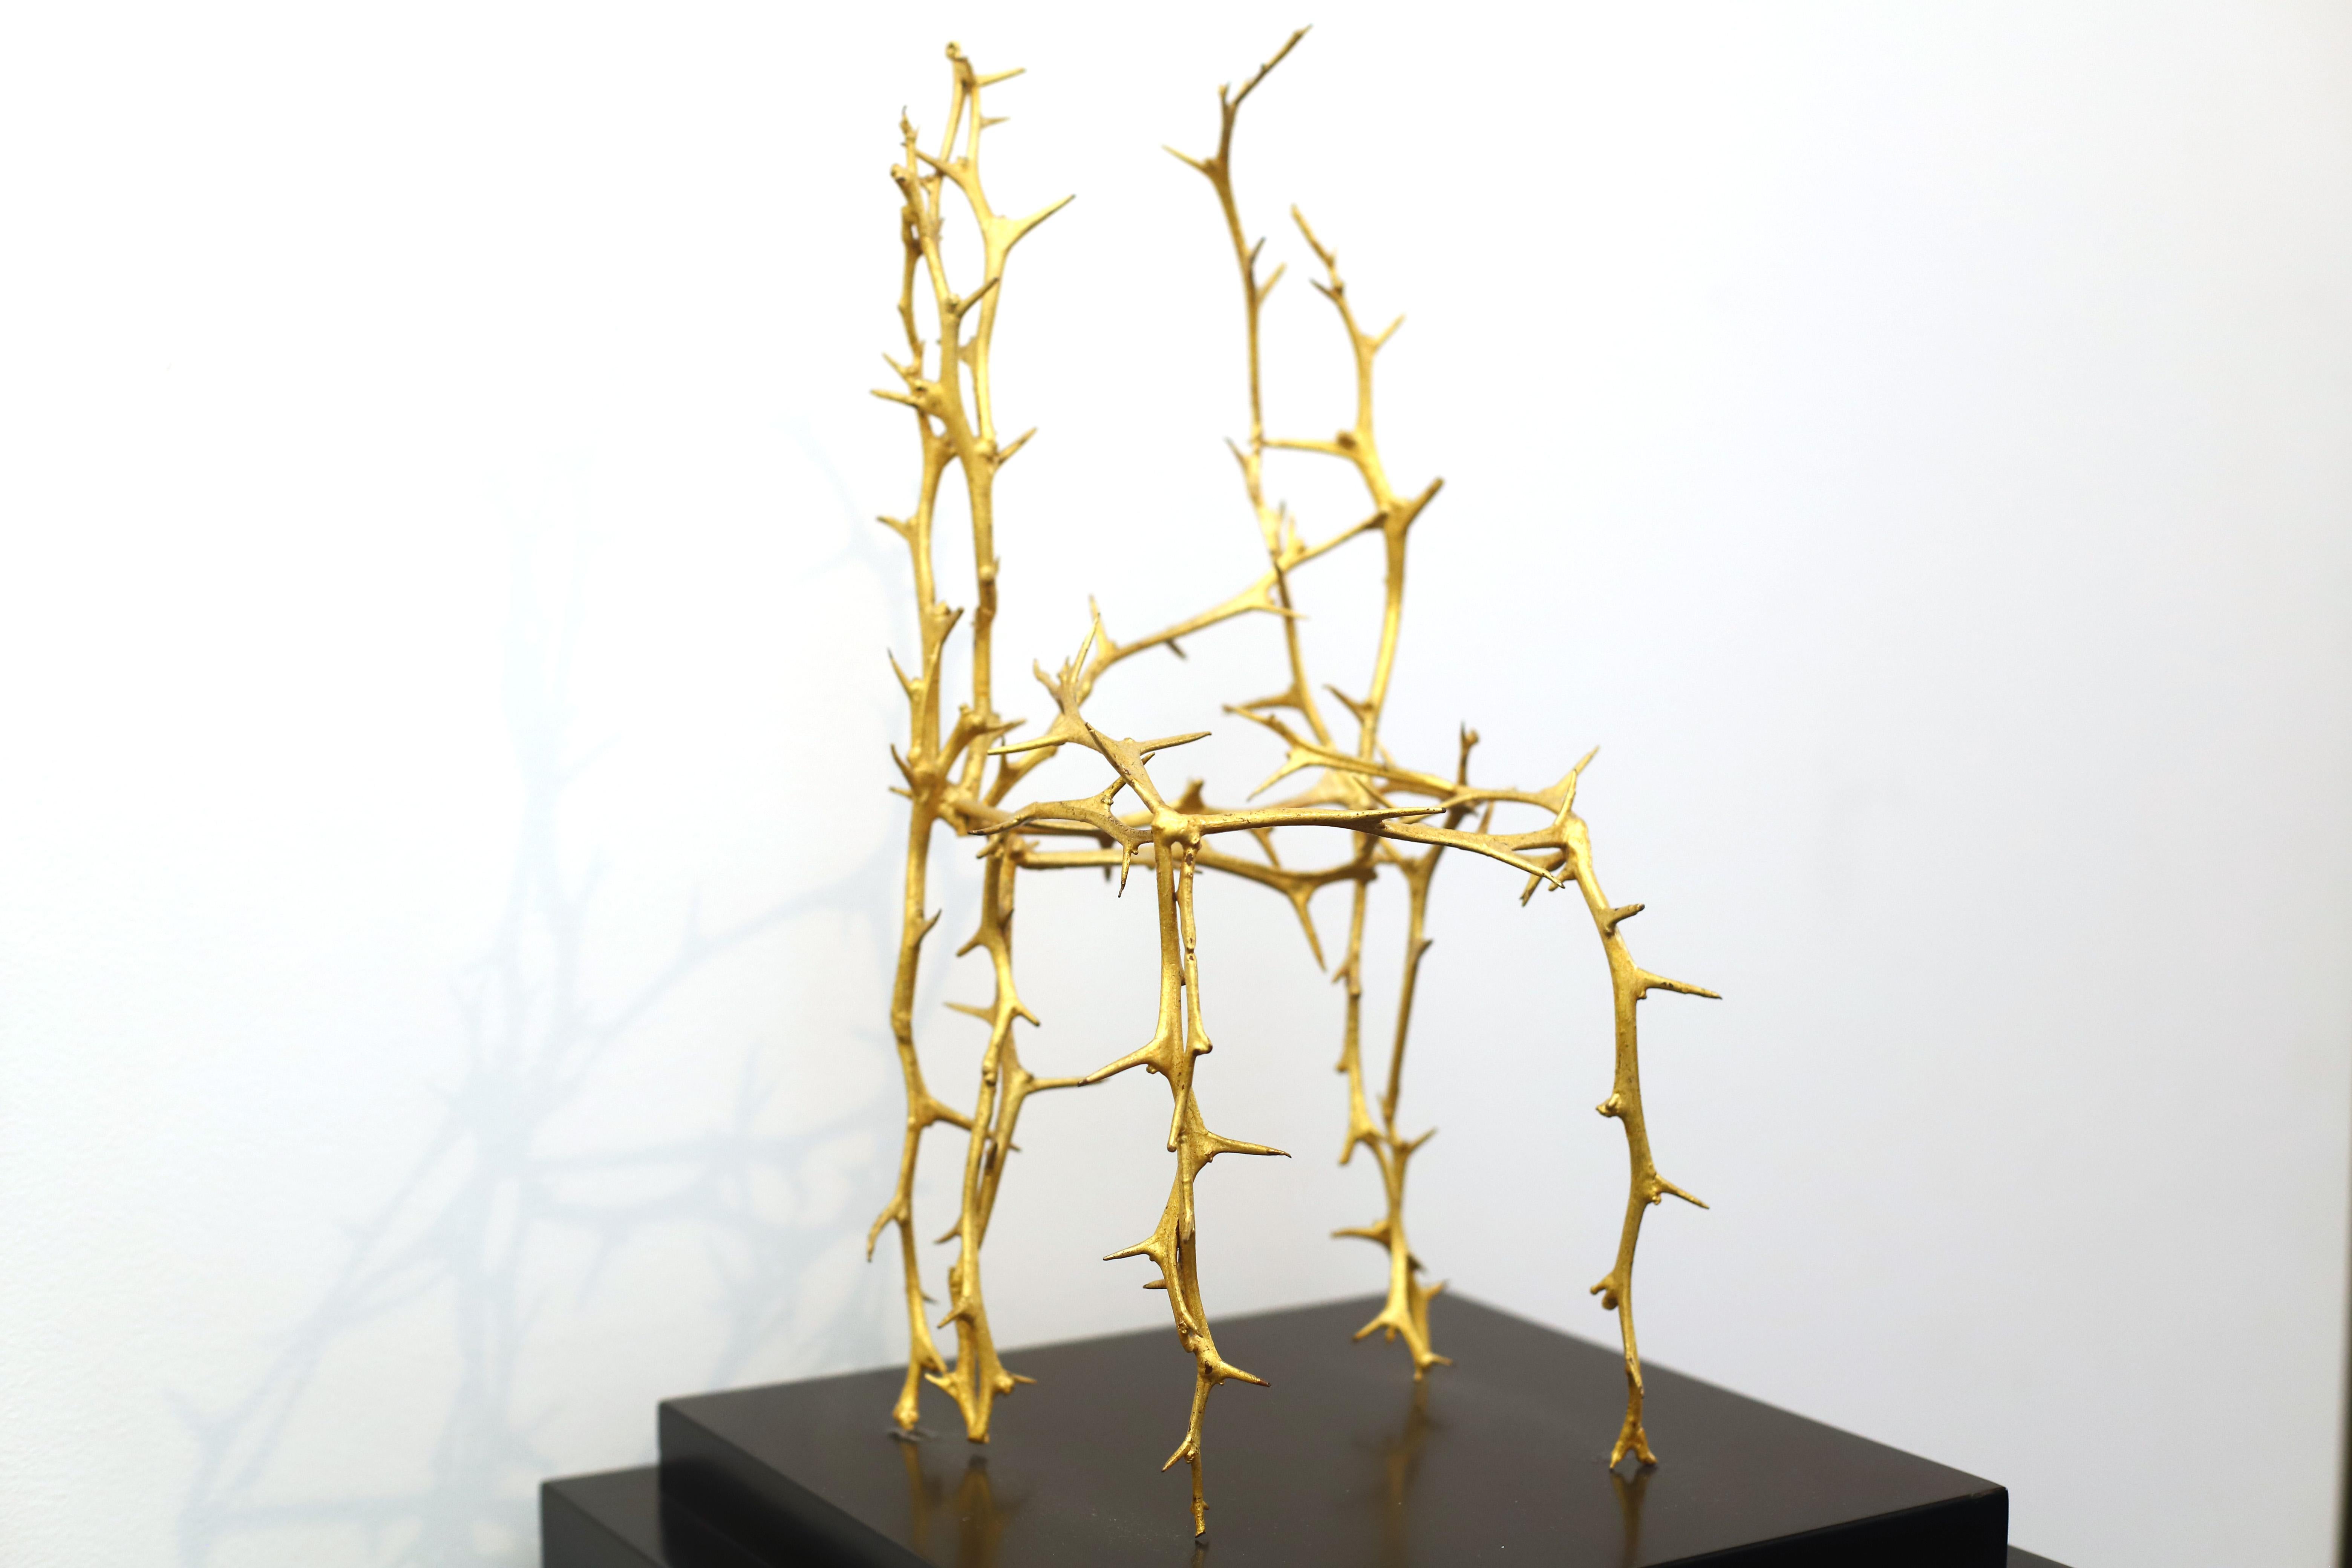 One of Michele Oka Doner chairs from her Terrible Chair Series. Unique bonze wiuth gold leaf sculpture from 1990. Sculpture inpired in nature's thorned branches. The artist is known for the use of natural objects as motifs and metaphors. The